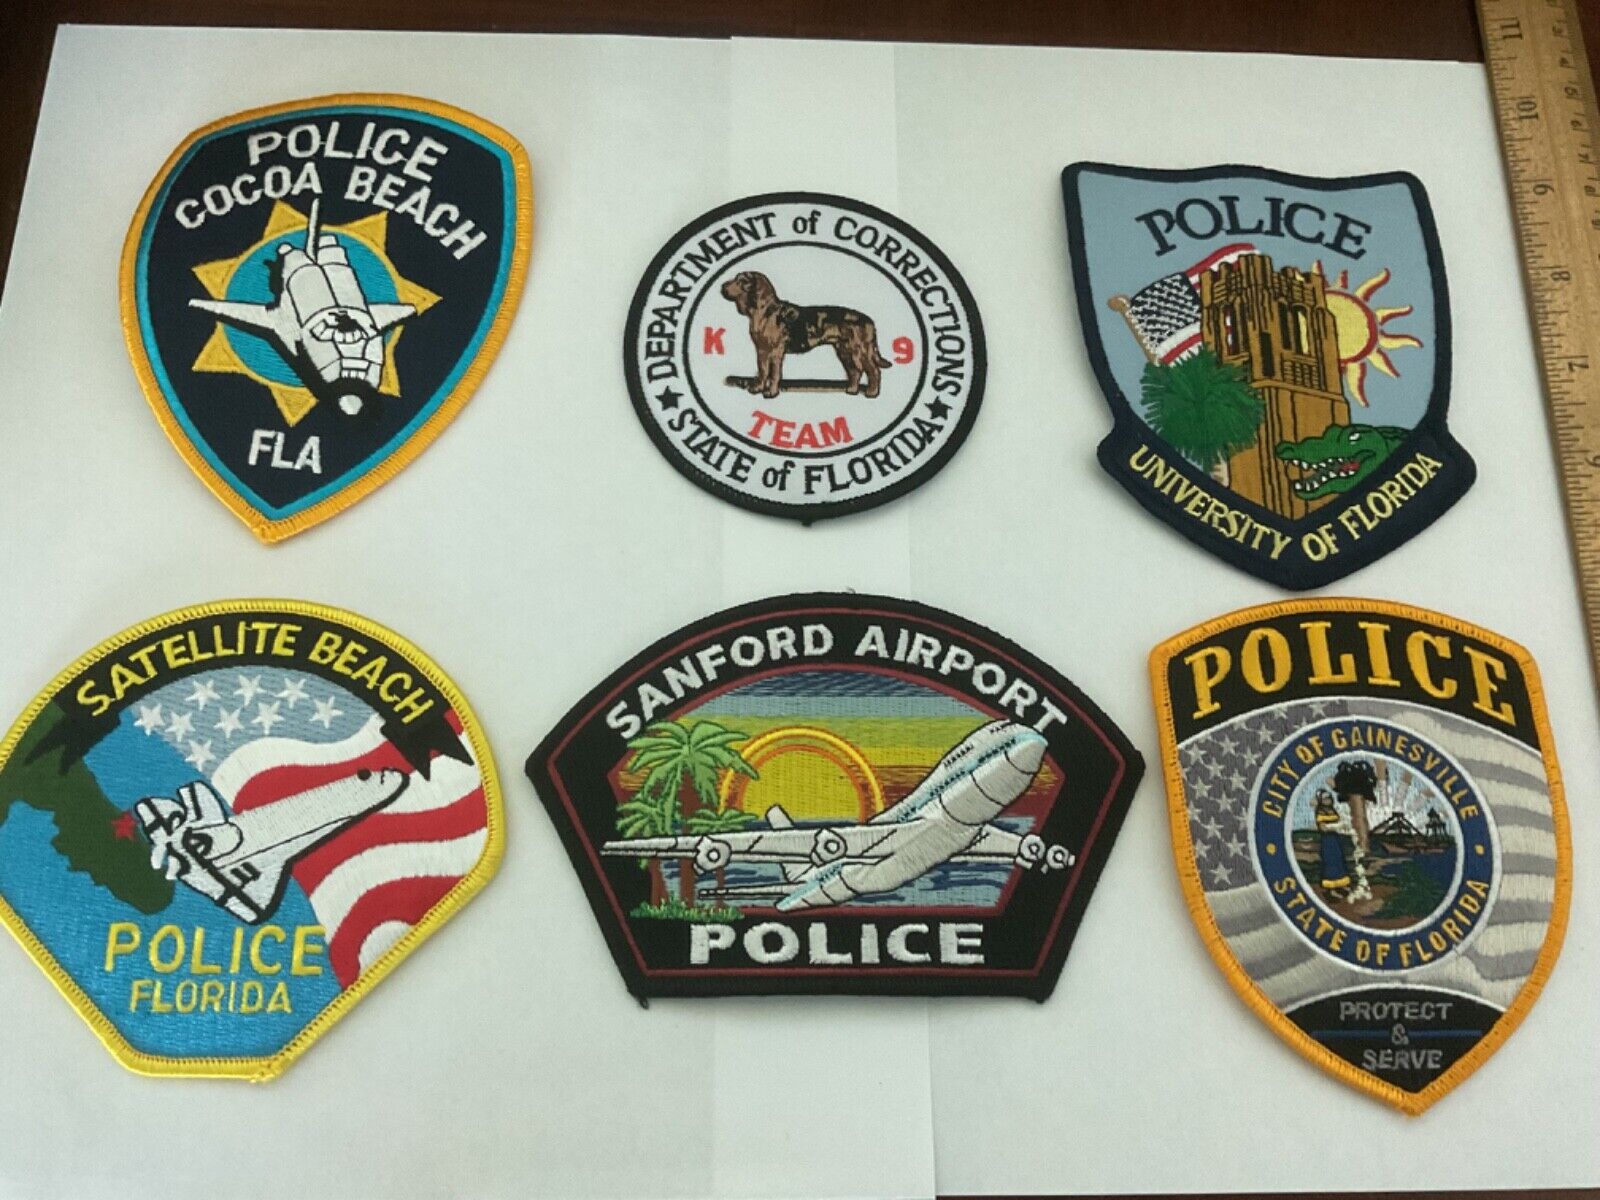 Florida Police LawEnforcement collectors embroidered patch set 6 pieces